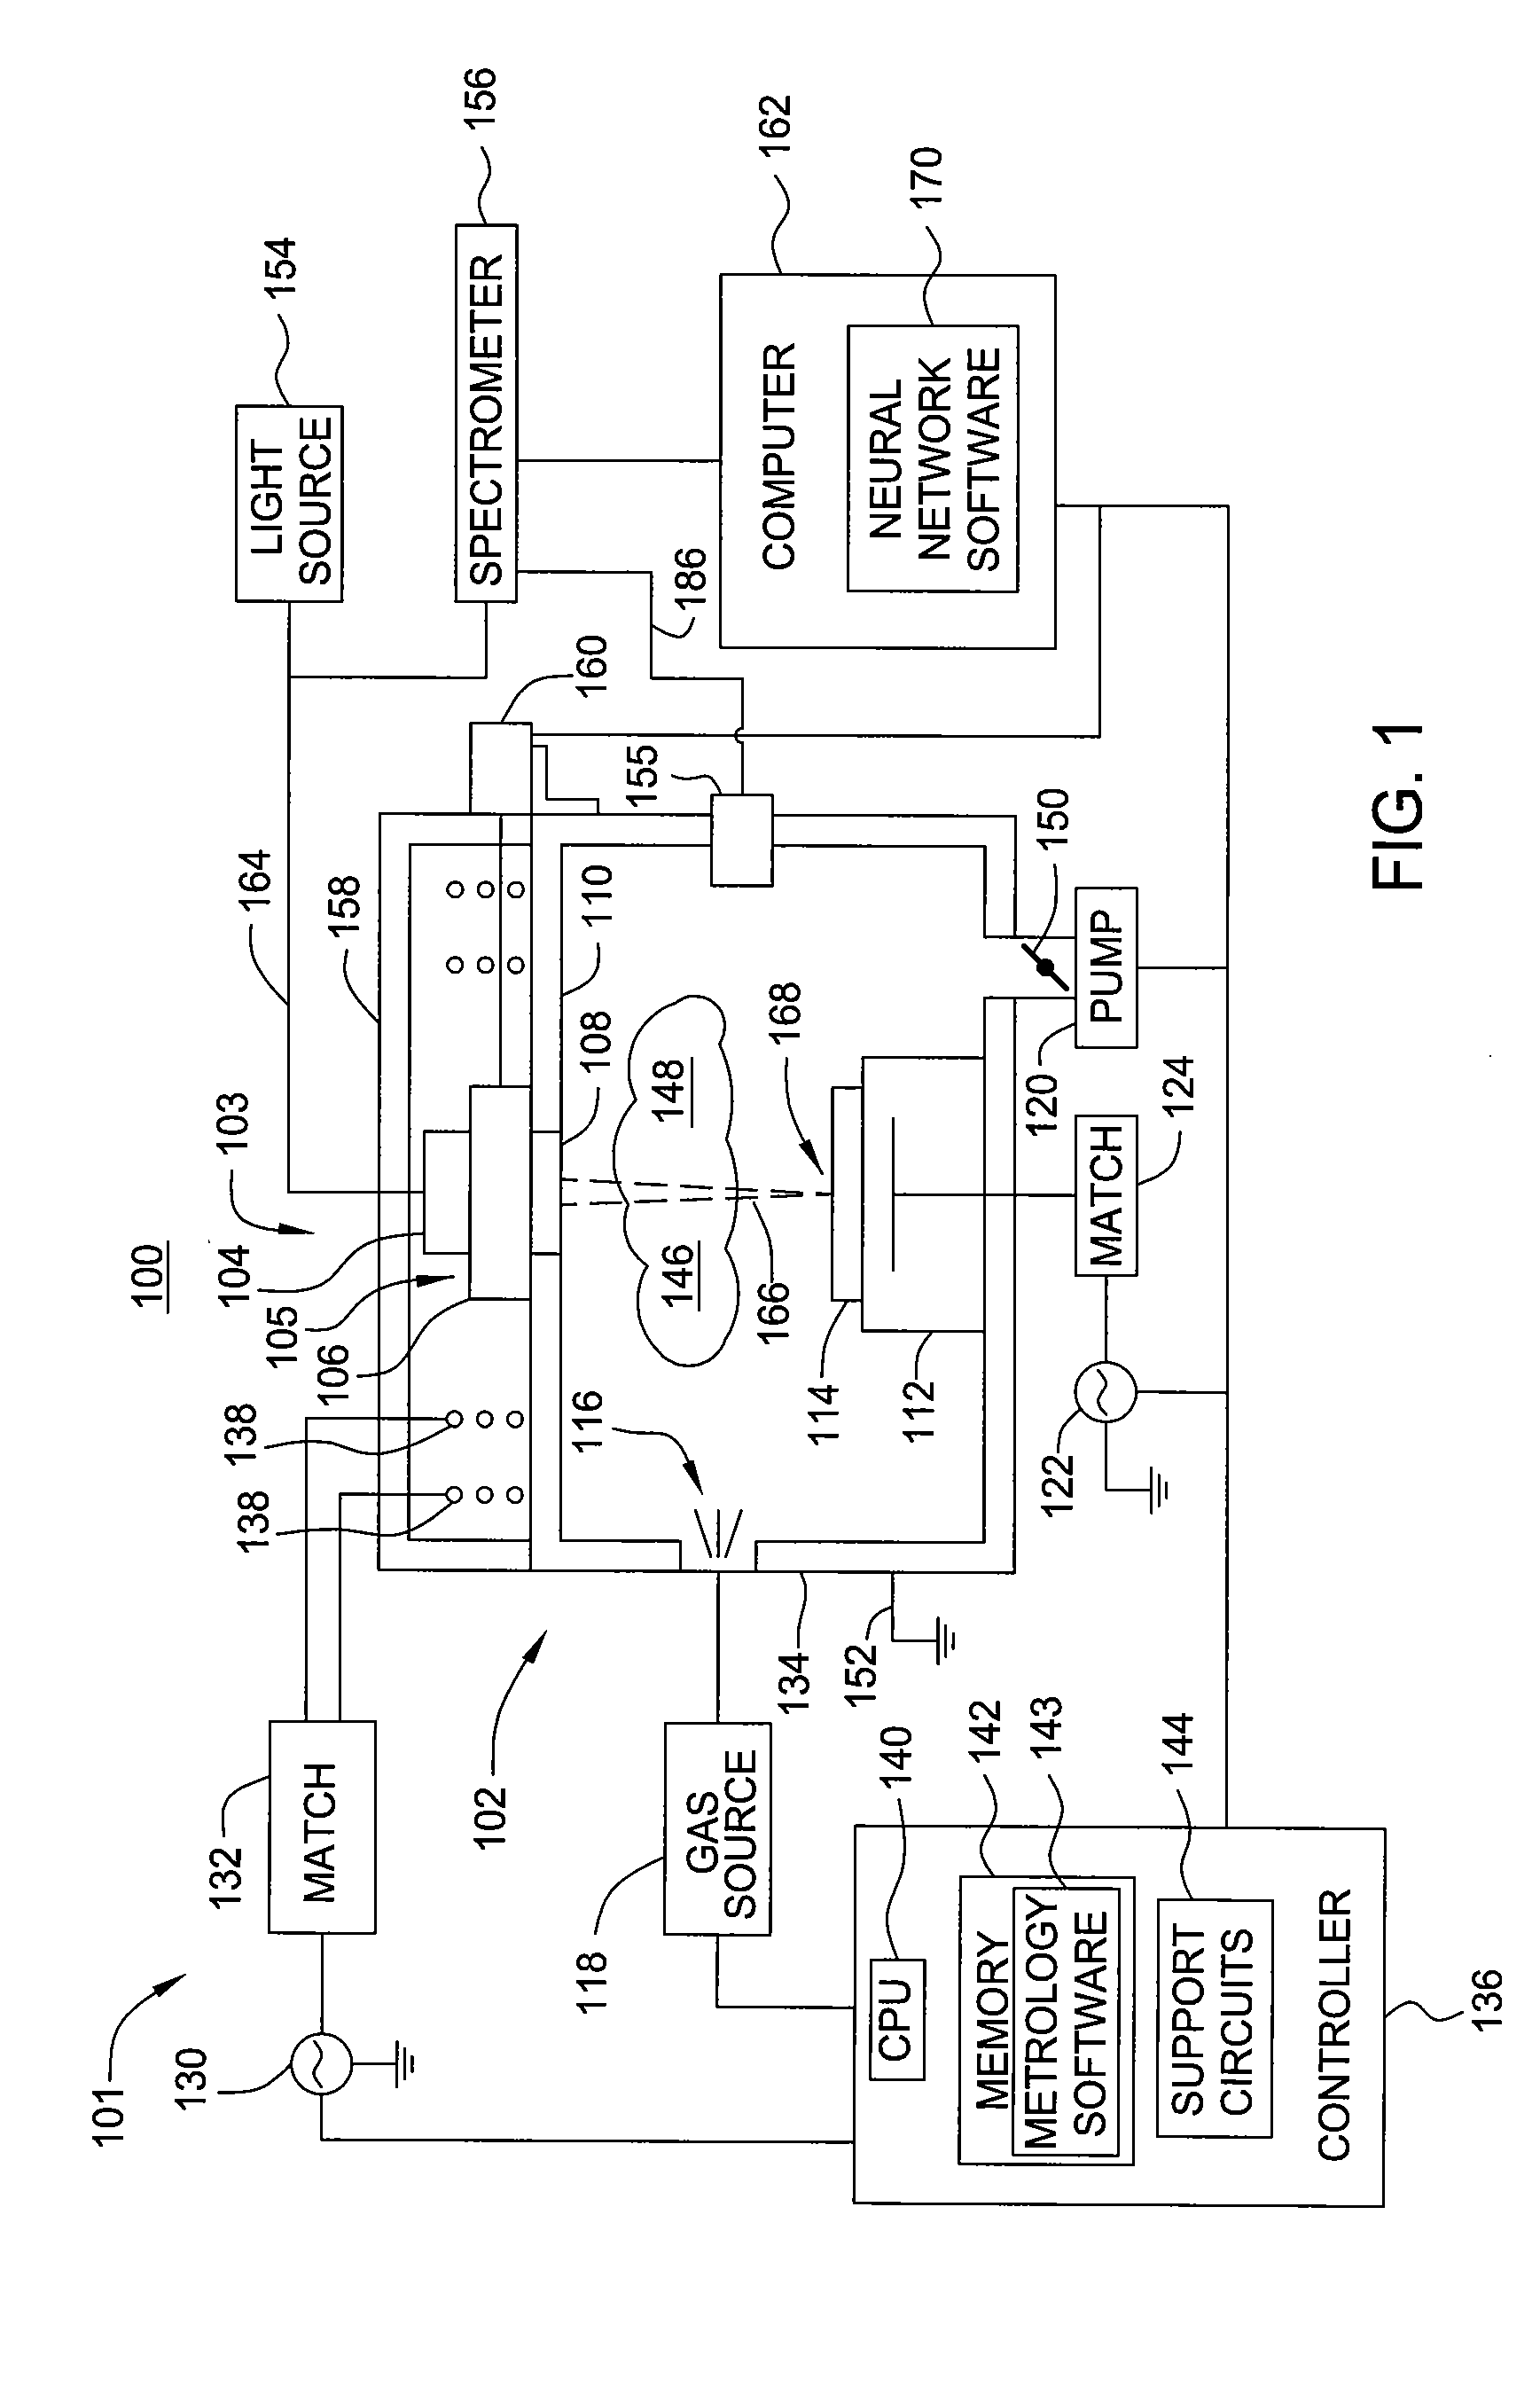 Neural Network Methods and Apparatuses for Monitoring Substrate Processing